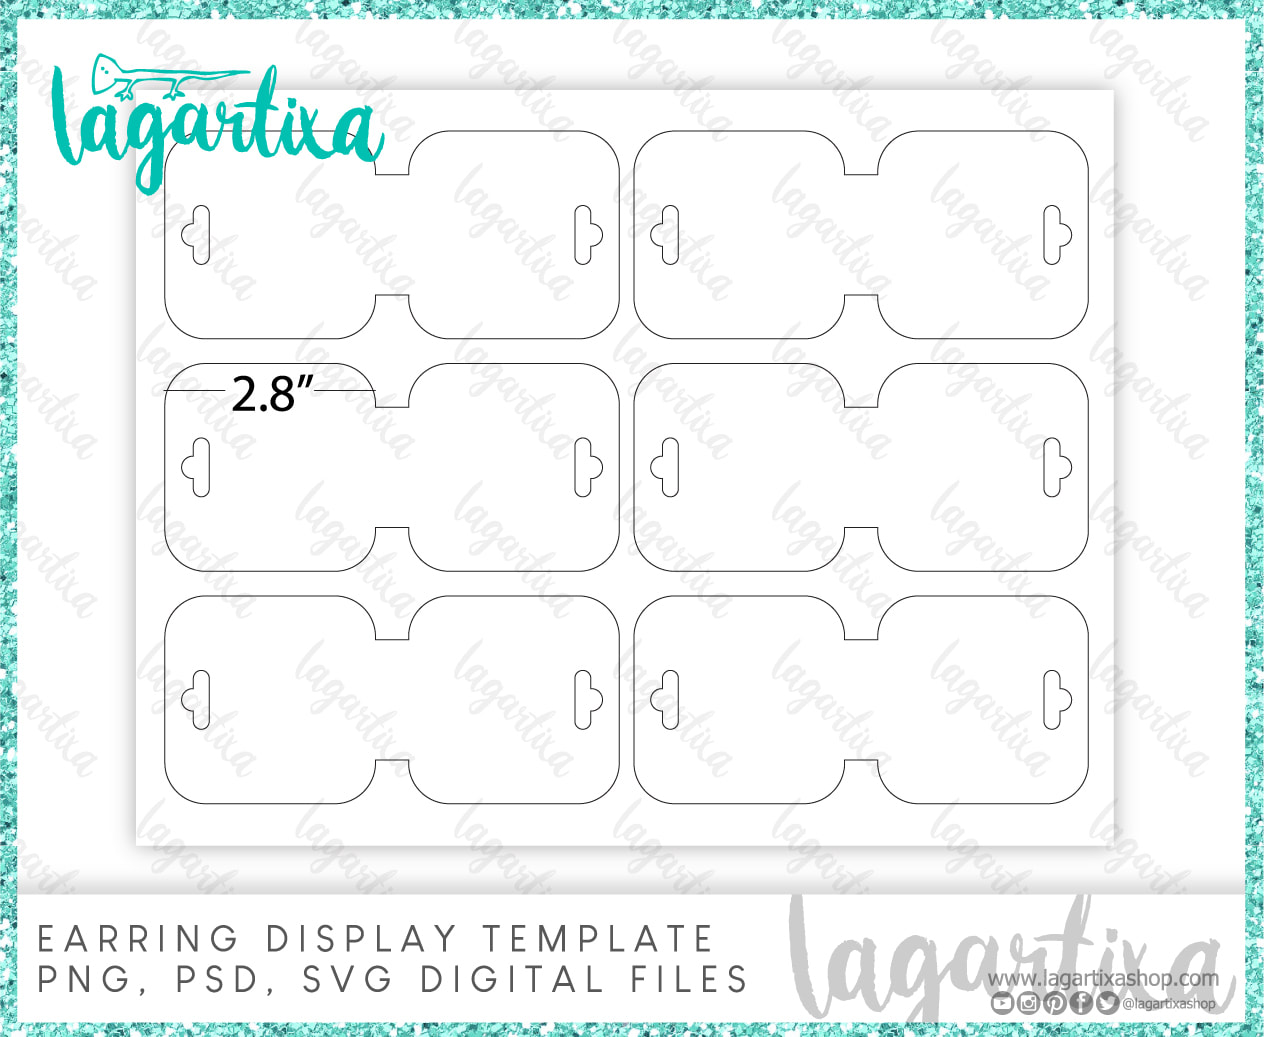 Earring Display Template formats PNG, PSD, Ai, SVG Ready to create your own design and sell your own products, design your labels / Molde Plantilla Template Para etiquetas de Aretes Hecho